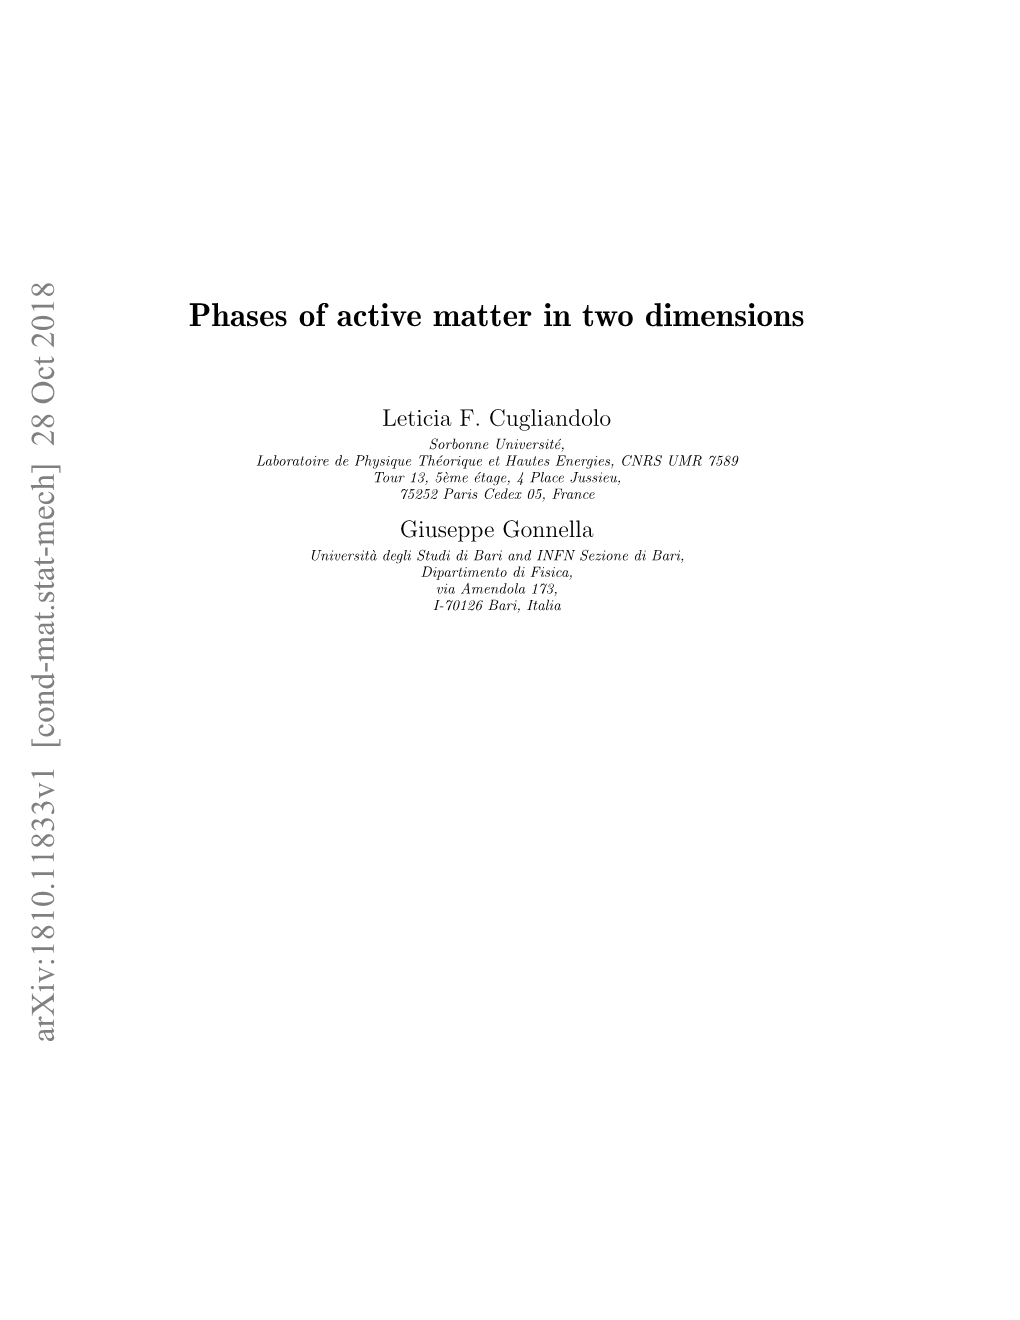 Phases of Active Matter in Two Dimensions